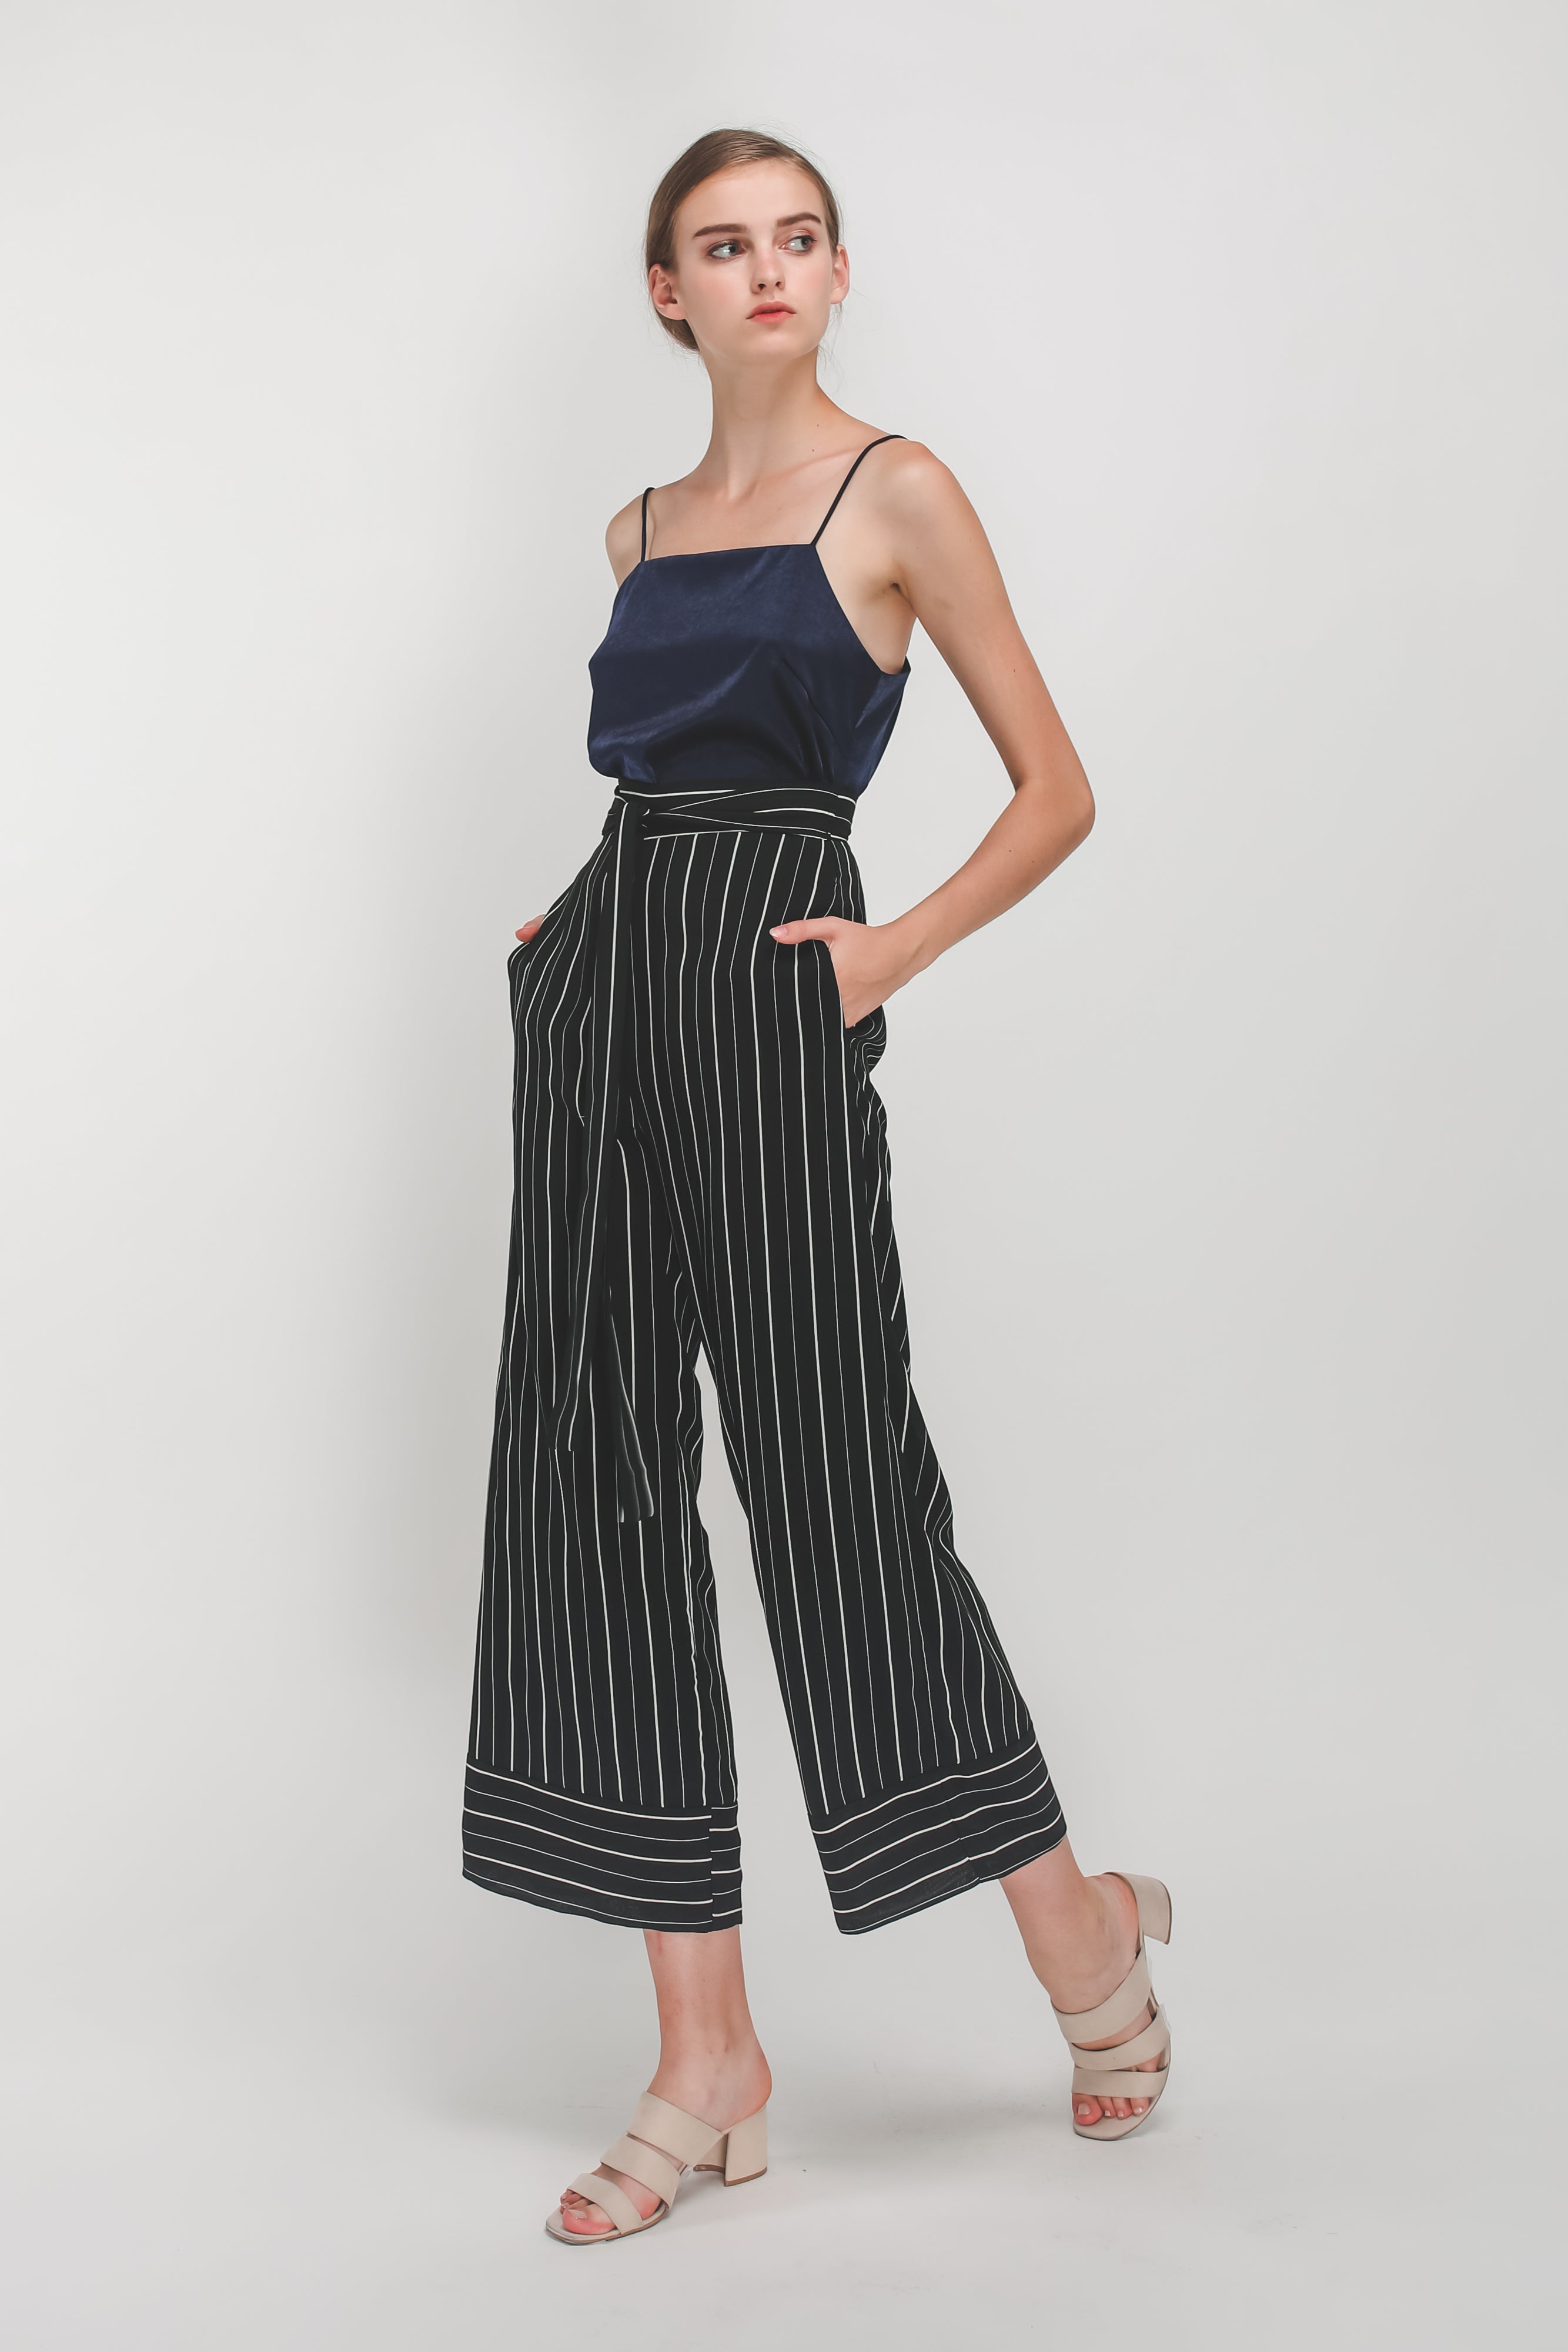 Knotted Wide Legged Pants In Black/White Stripes